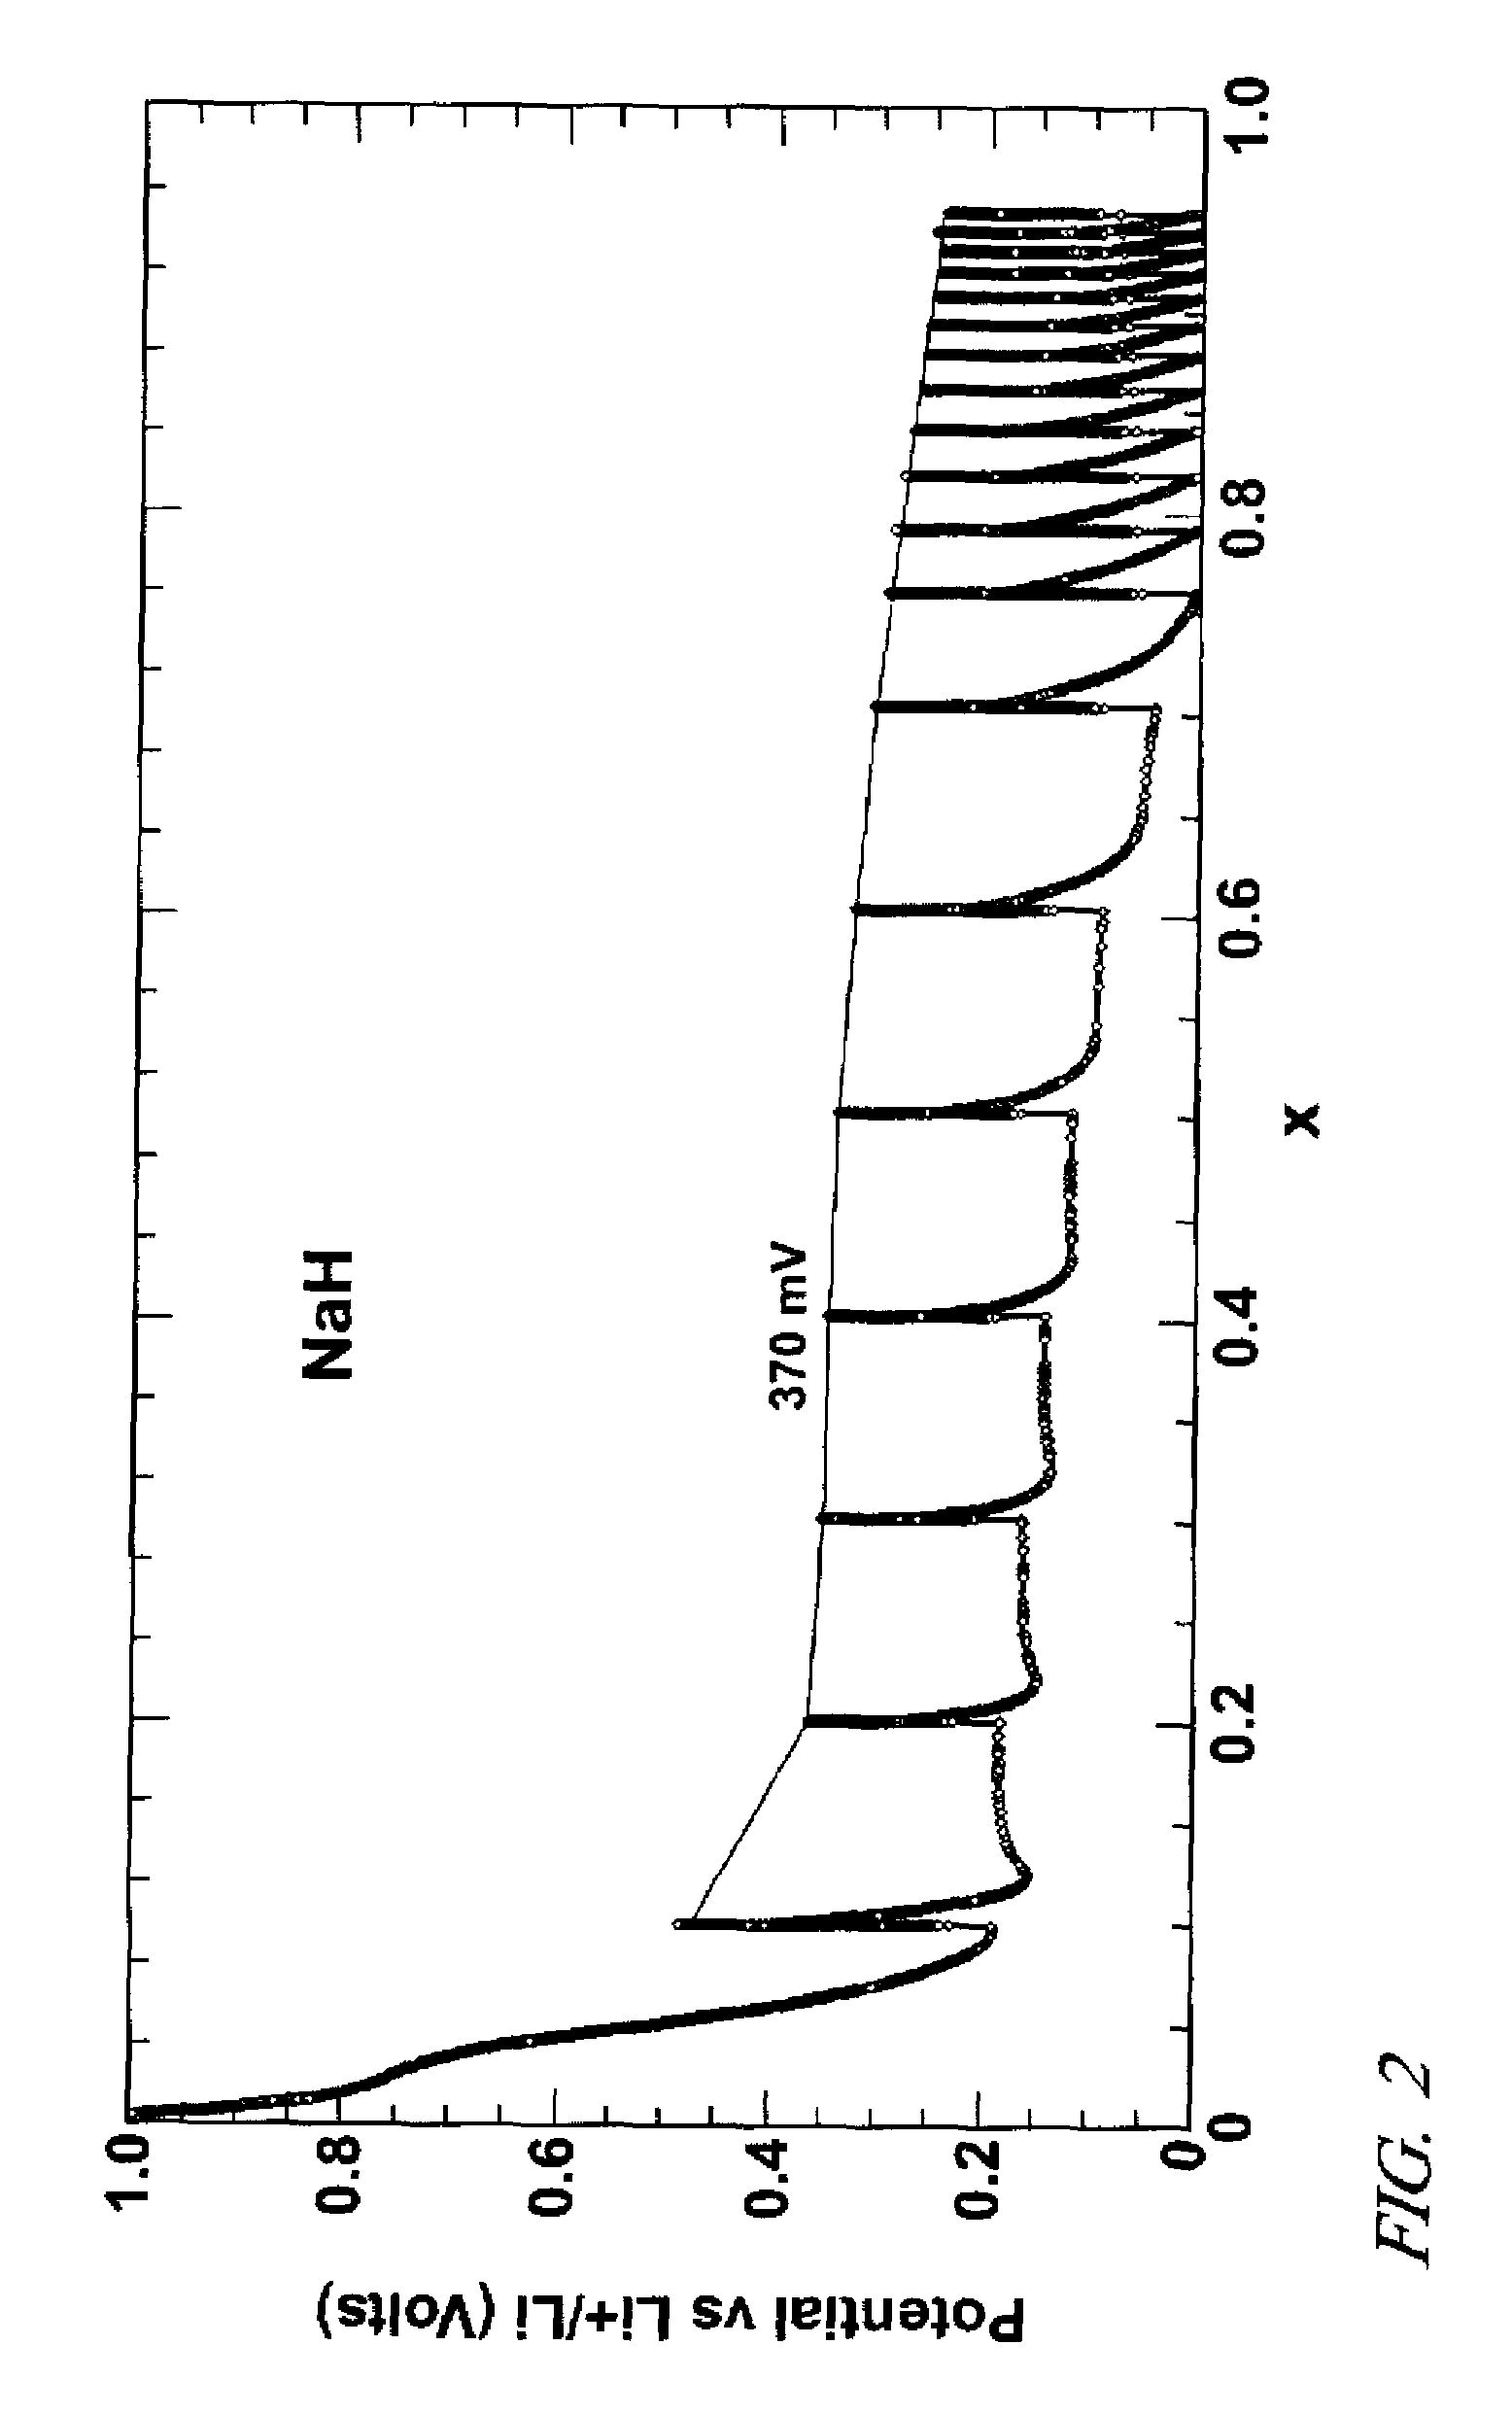 Lithium hydride negative electrode for rechargeable lithium batteries